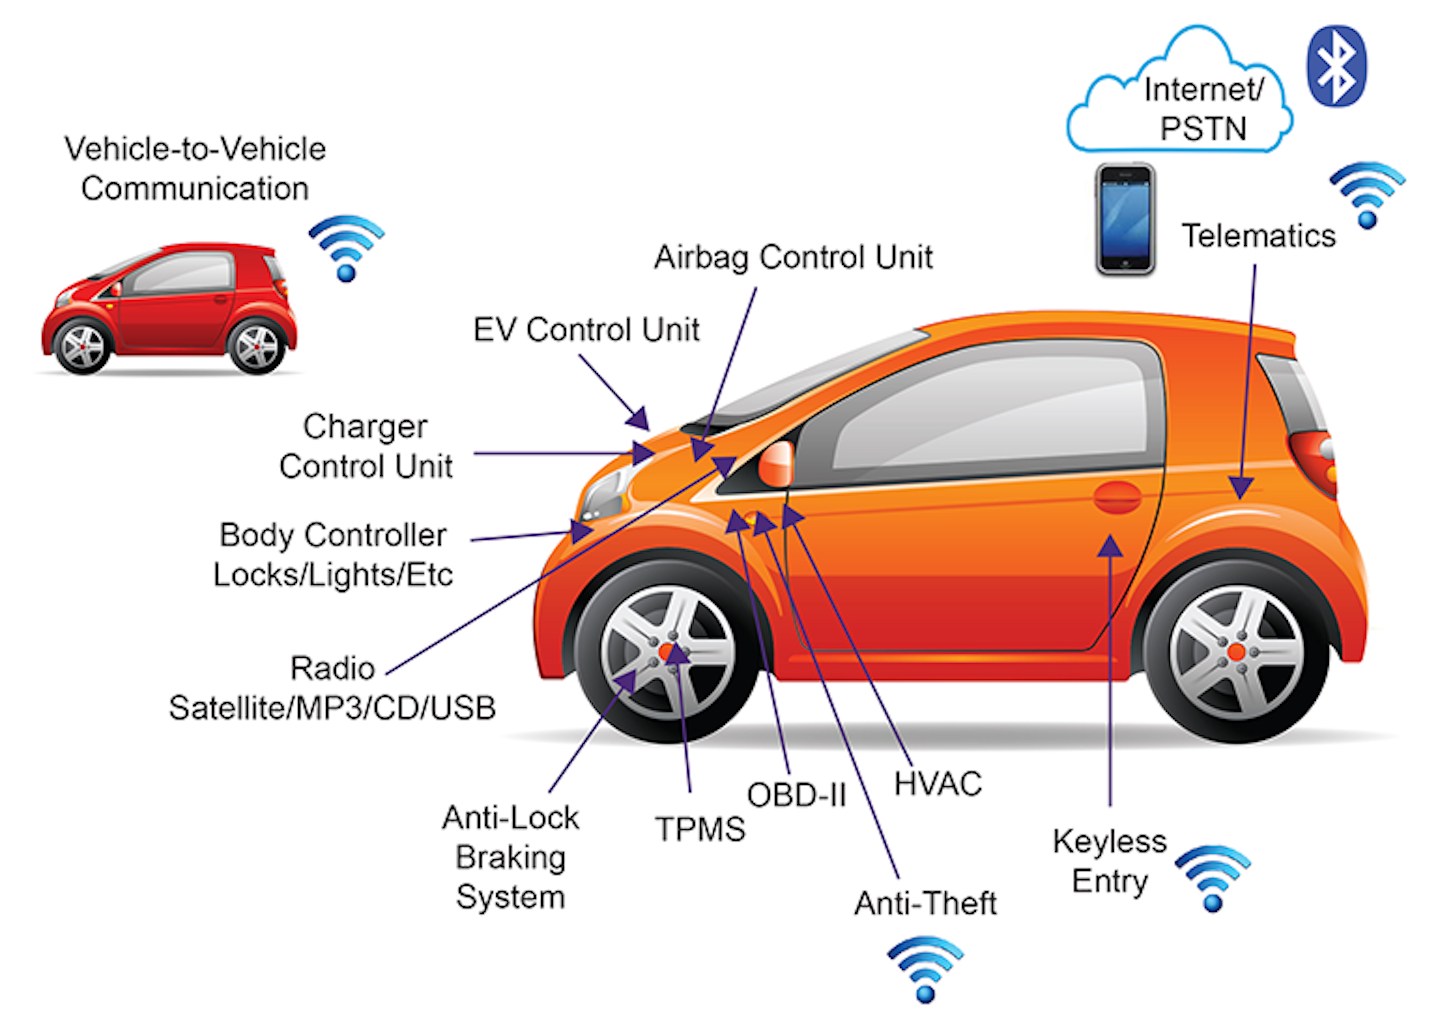 Electric Vehicles Secure Code Matters! Electronic Design